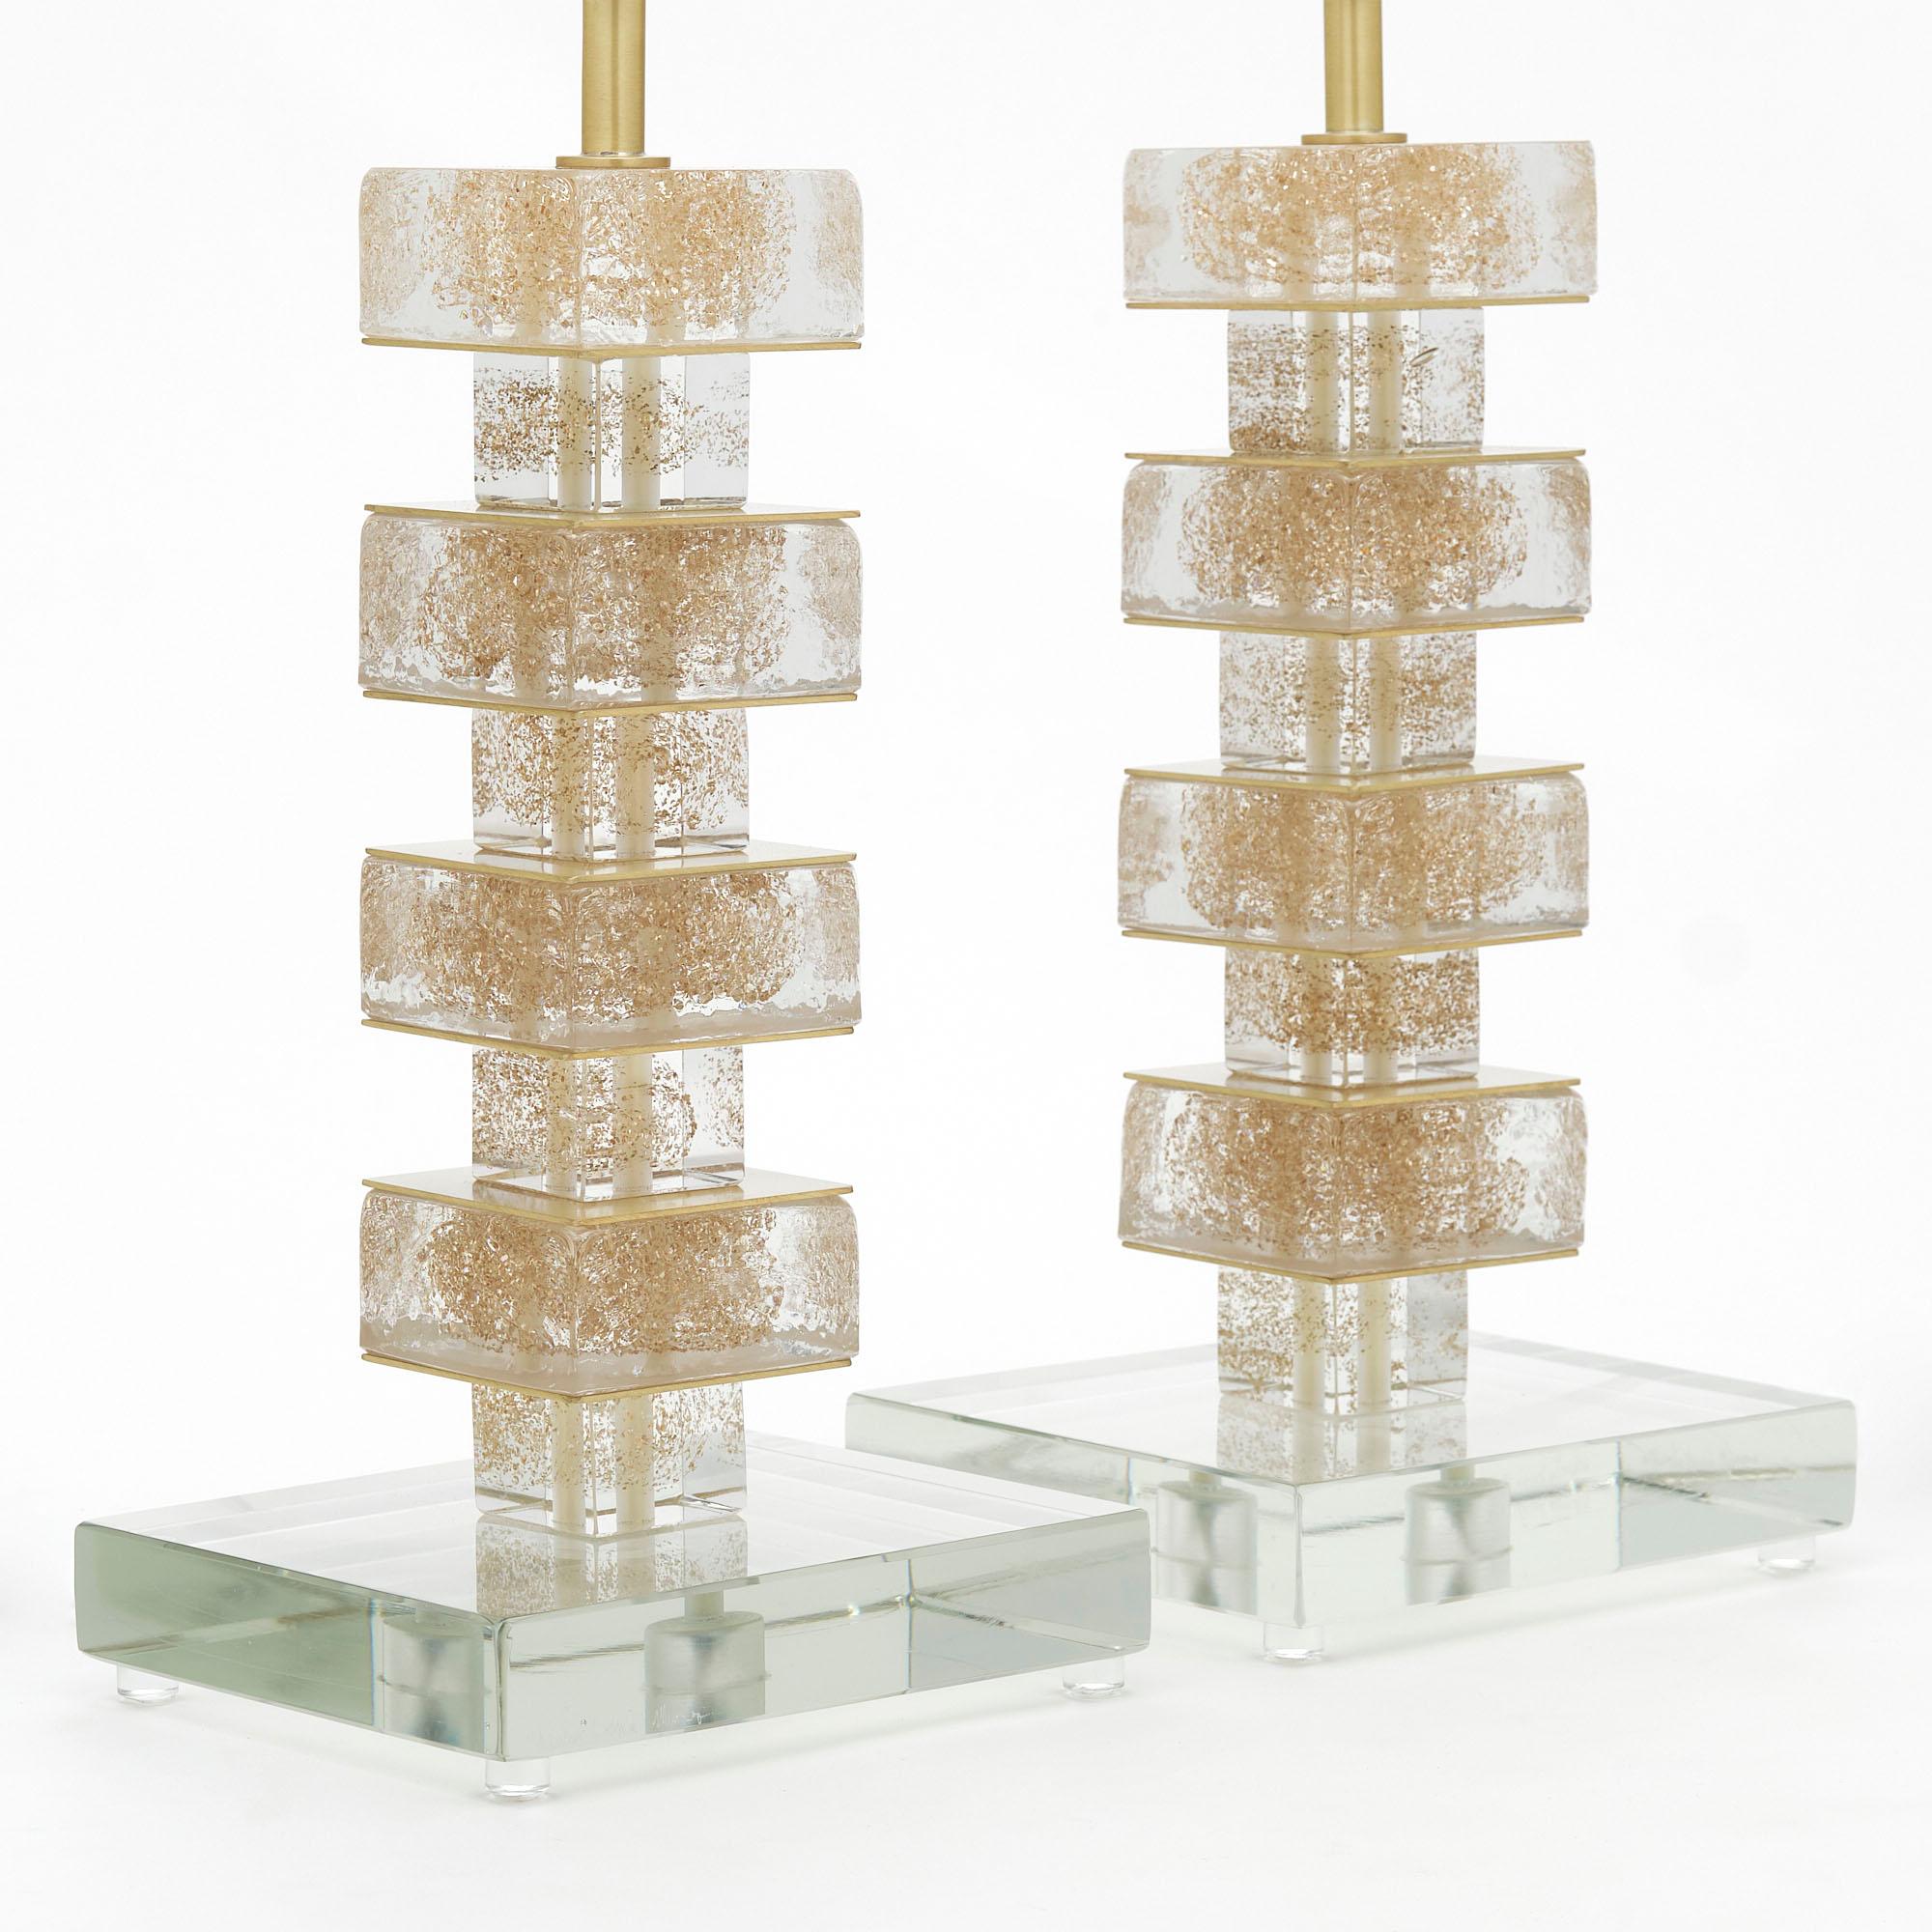 Pair of Italian lamps from the island of Murano. These contemporary lamps feature stacked cubic elements fused with 24 carat gold flecks throughout. They have been newly wired to US standards.